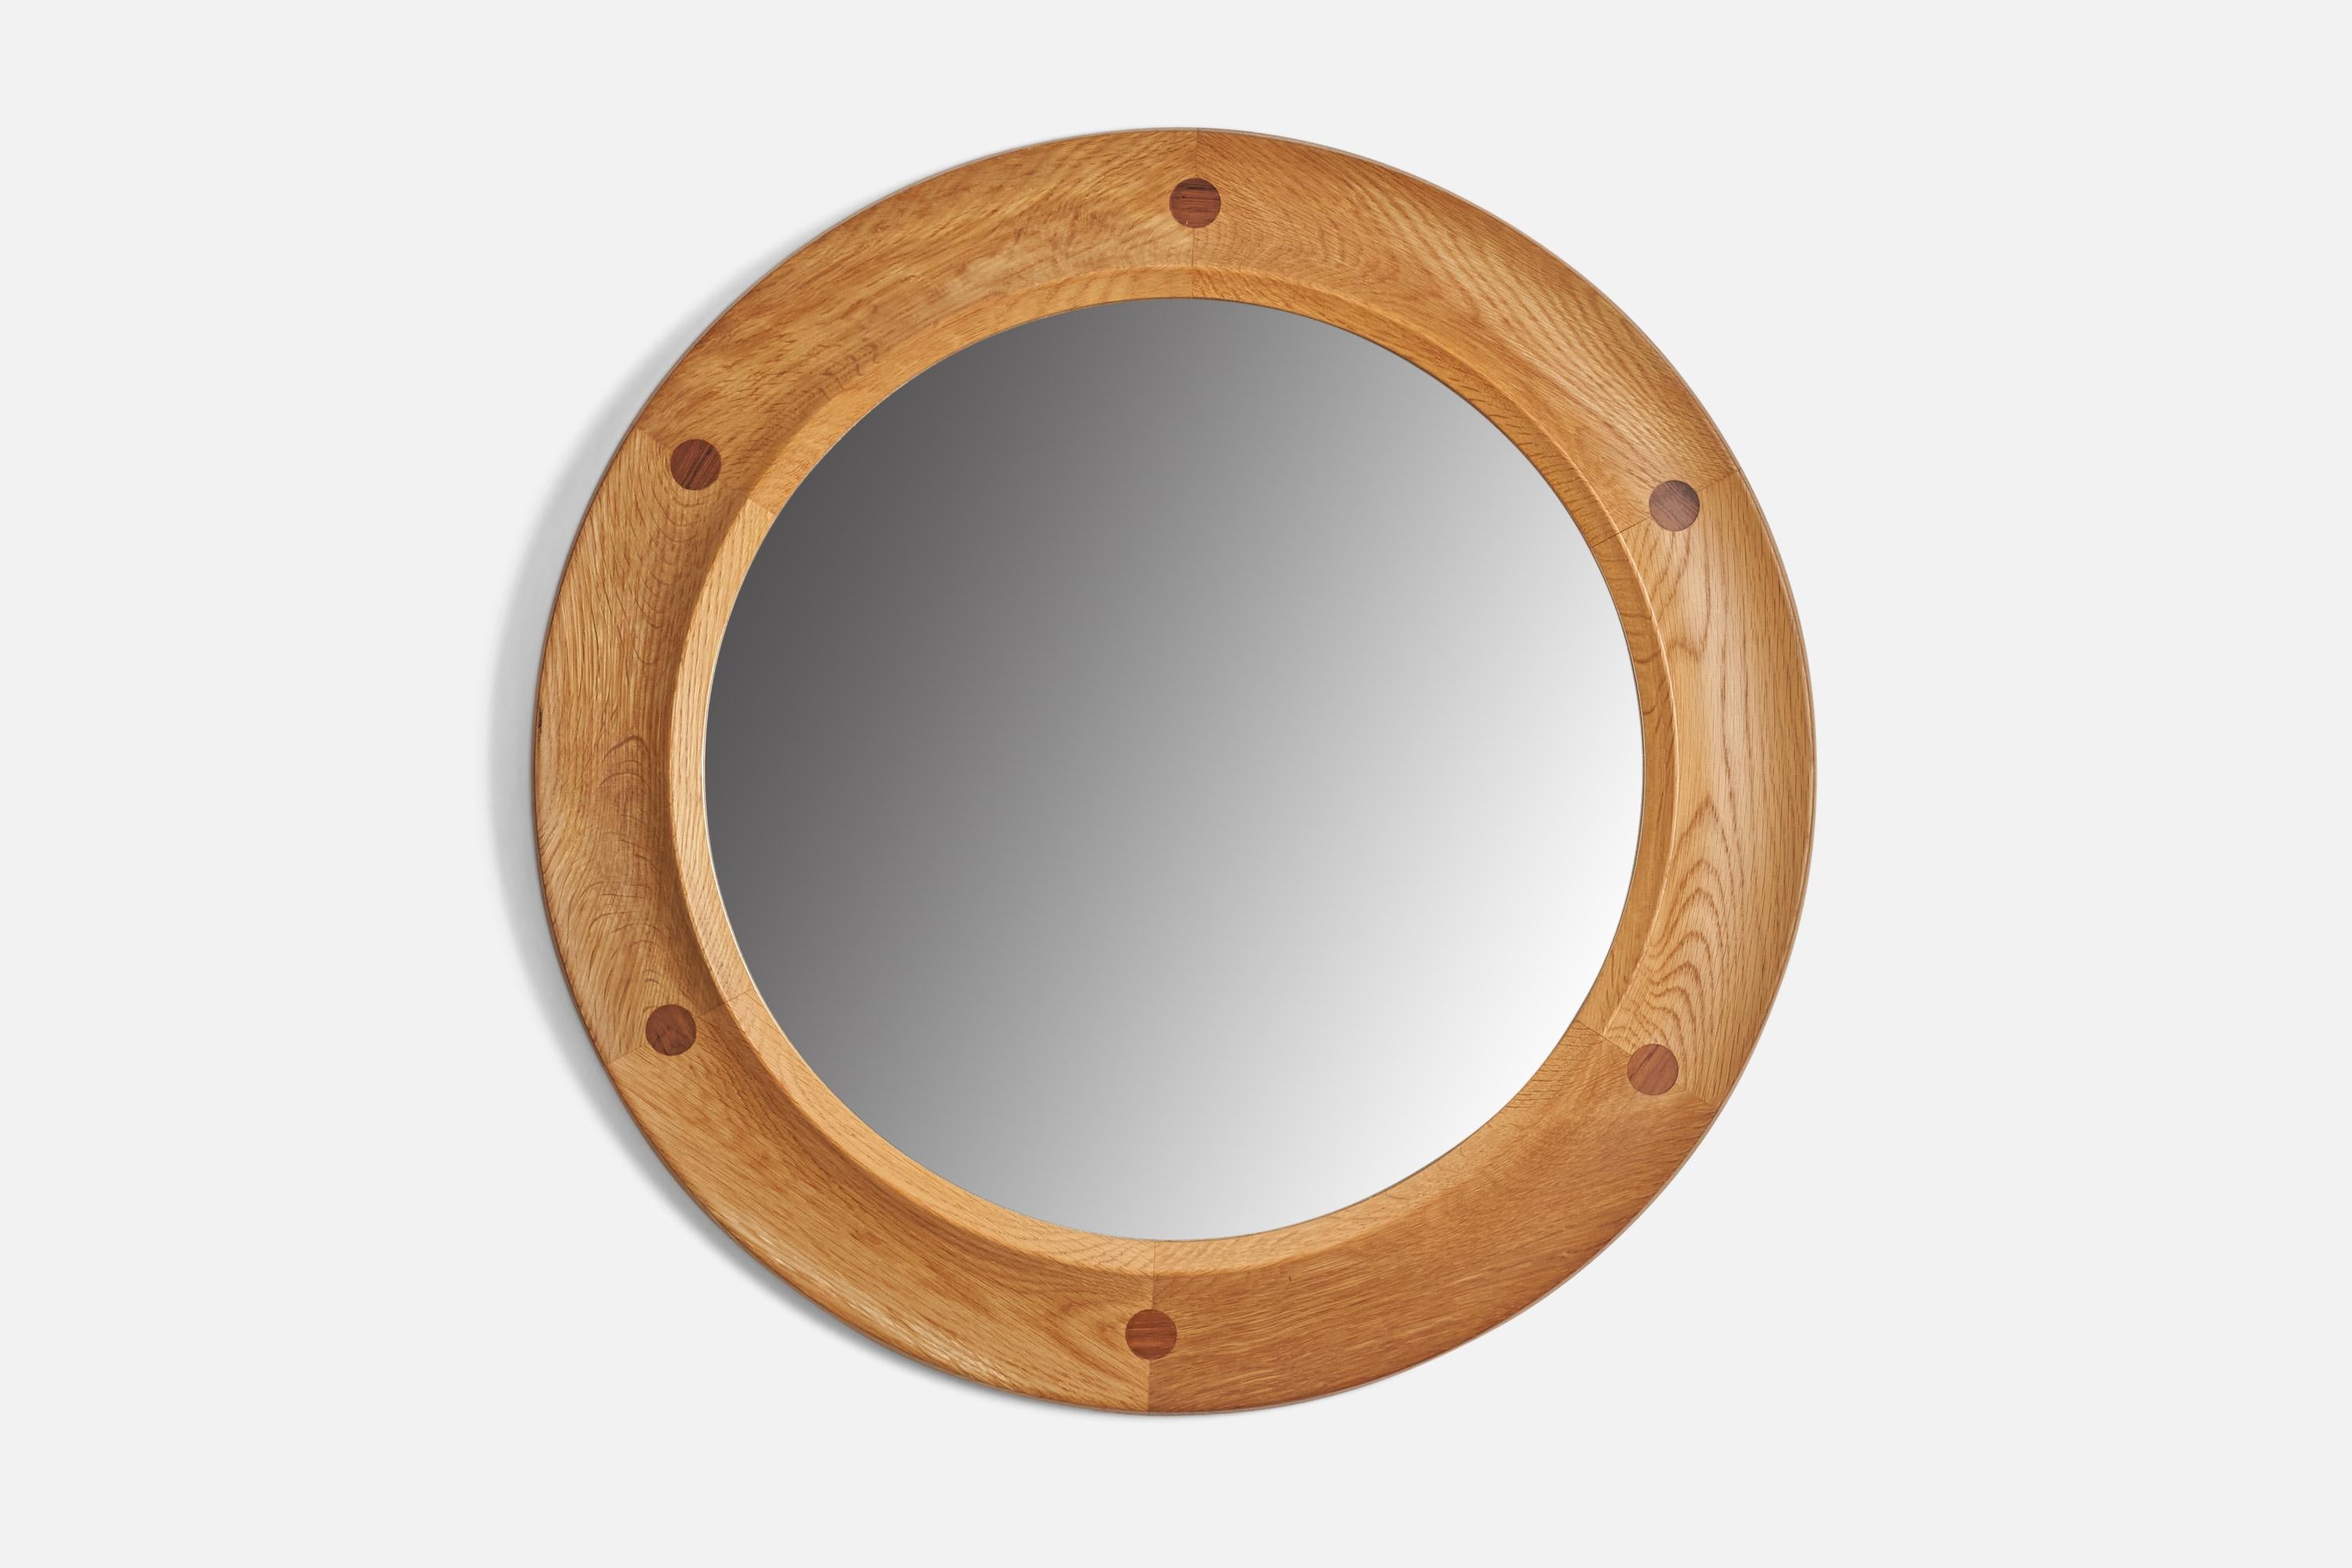 An oak and rosewood wall mirror designed and produced by Fröseke Nybrofabriken, Sweden, 1960s.